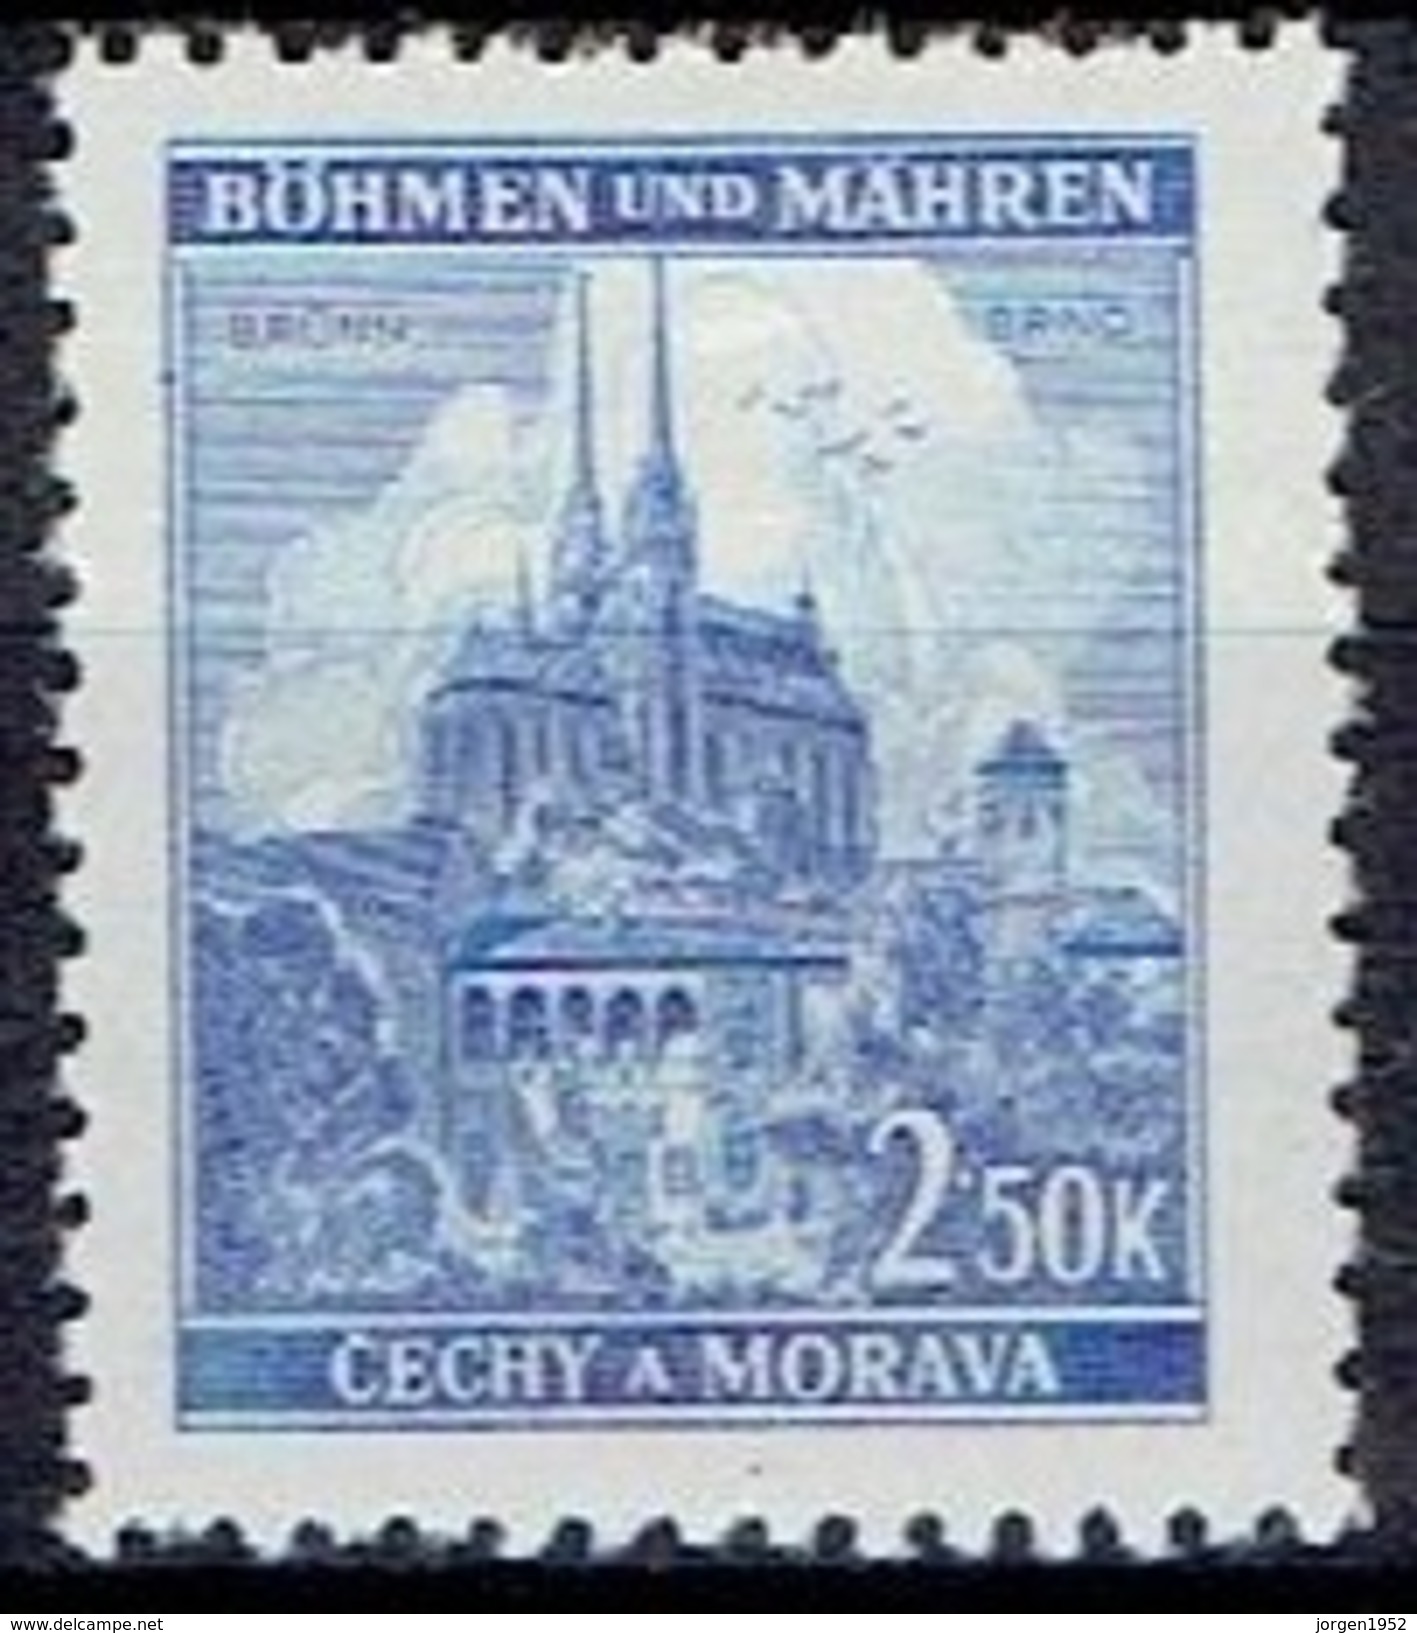 BOHEMIA & MORAVIA #  FROM 1941  STAMPWORLD 83** - Unused Stamps